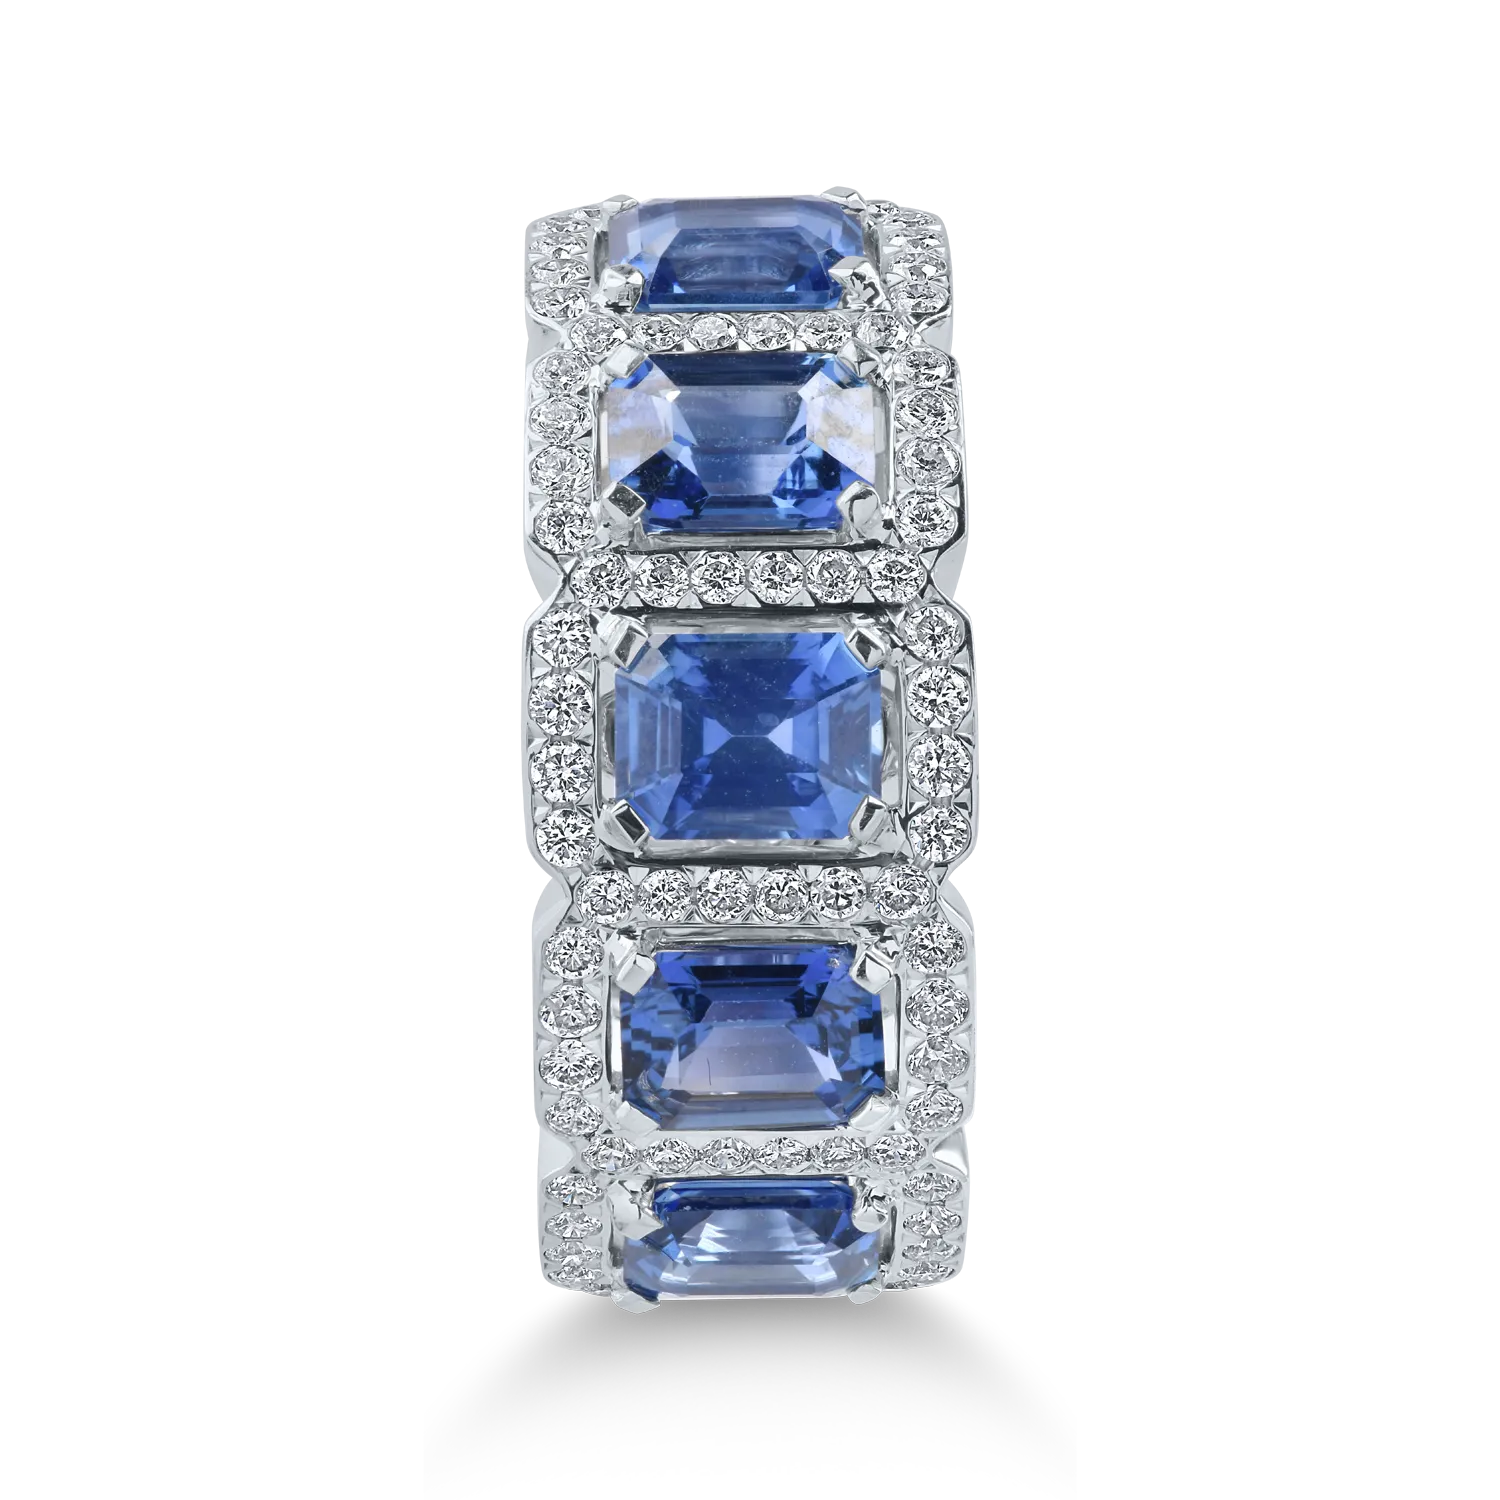 White gold ring with 2.58ct sapphires and 0.43ct diamonds